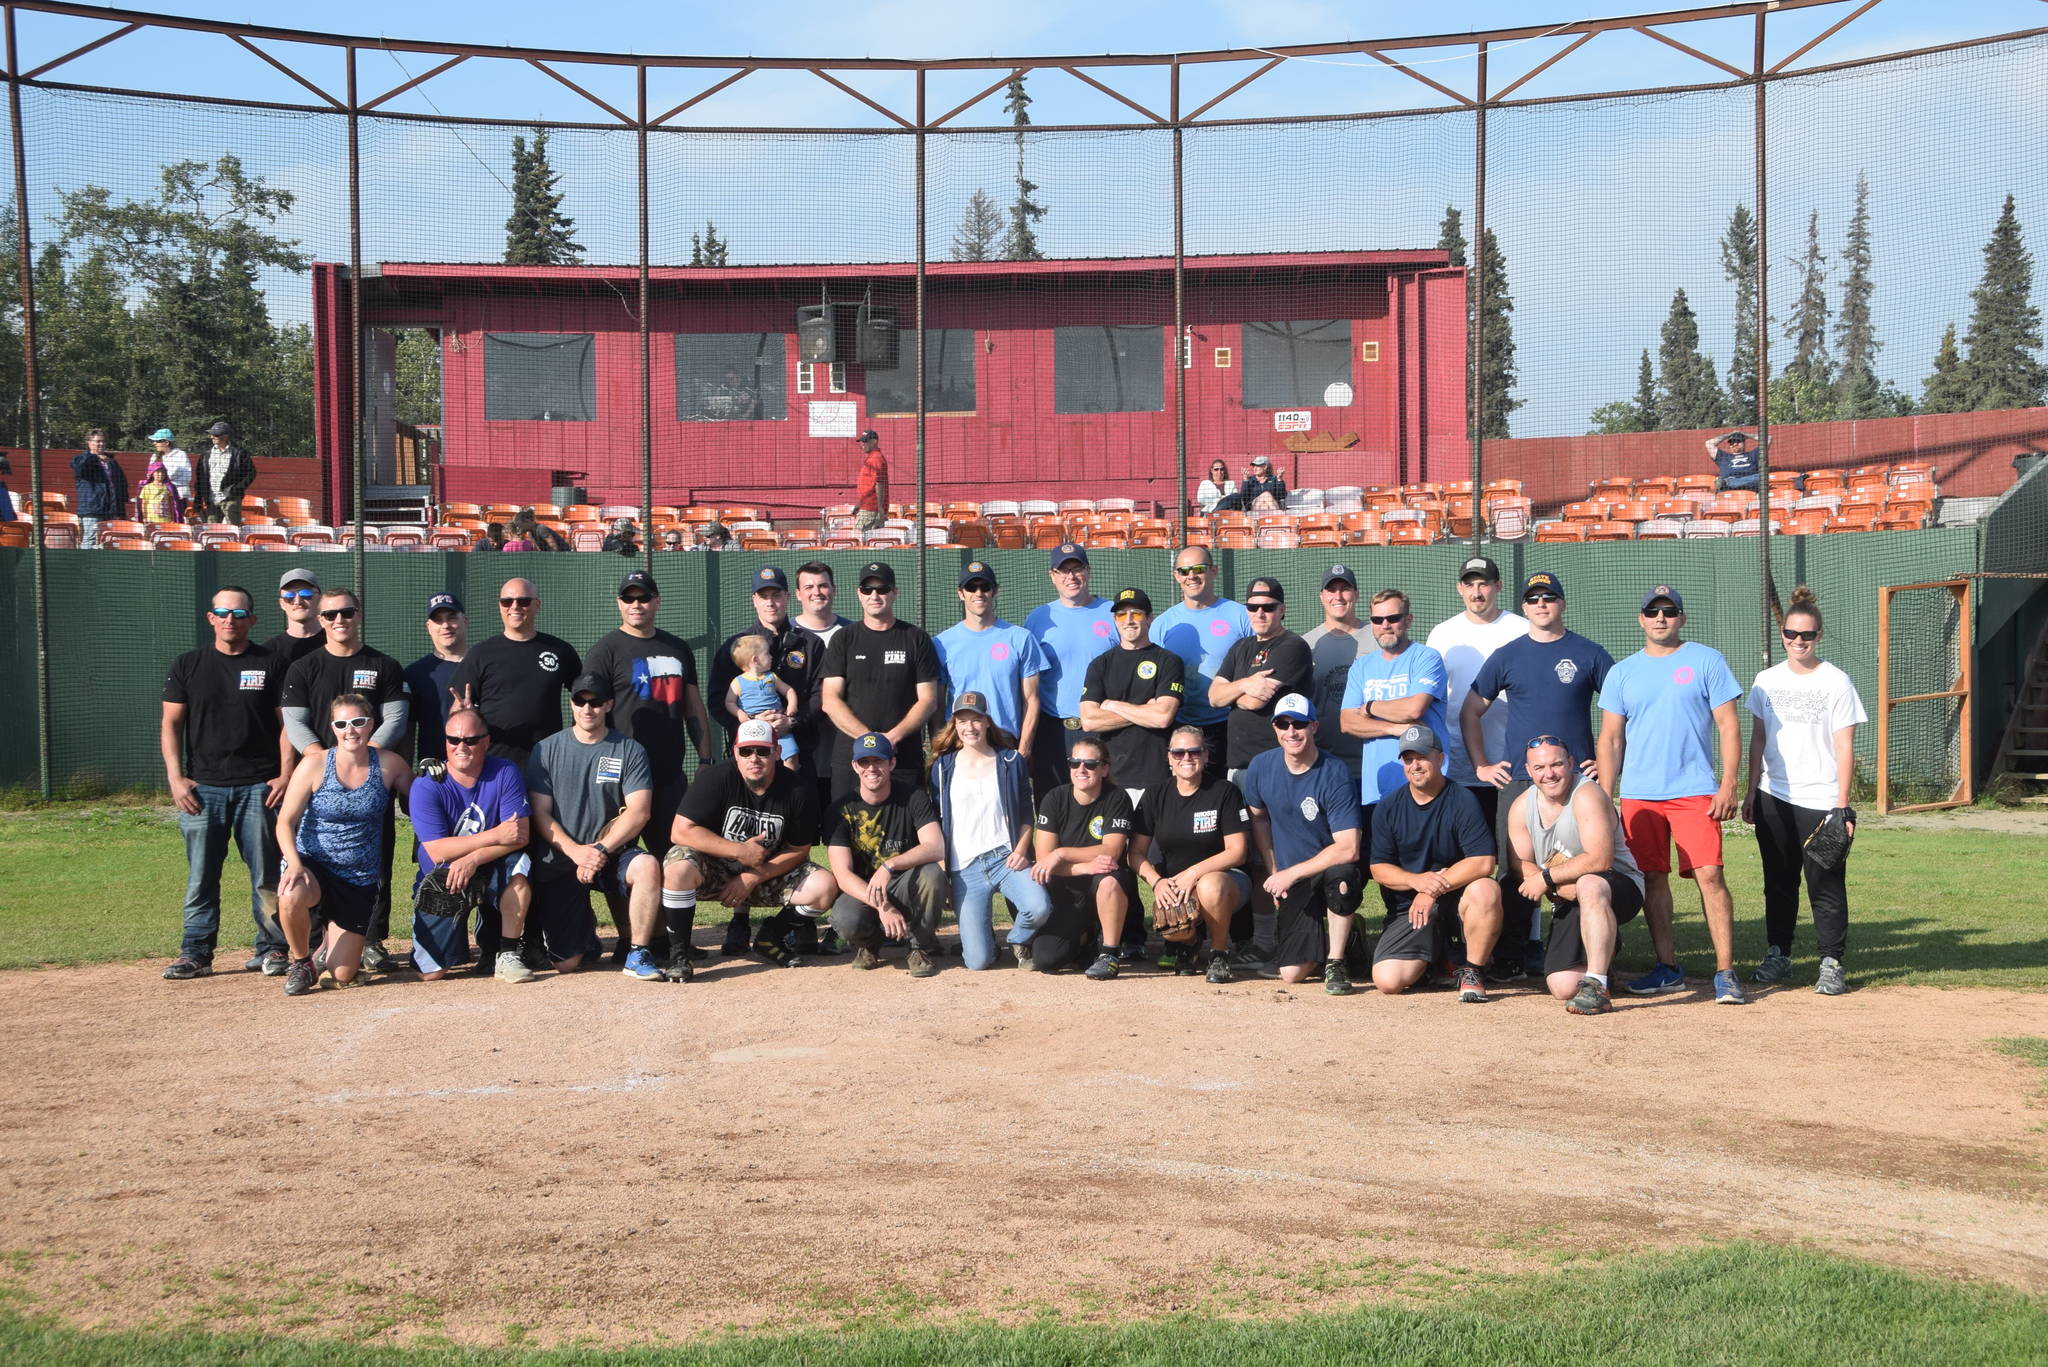 Local firefighters and law enforcement pose for a group photo after the third annual Guns and Hoses charity baseball game at Coral Seymour Memorial Park in Kenai, Alaska on July 19, 2019. The firefighters mounted an inspiring comeback in the last inning, but law enforcement won the game 6-5 and remain undefeated in the series. Bailey Epperheimer, front center, is the executive director of the Nikiski Children’s Fund and said that the game raised over $1800 for the fund, which is the most the nonprofit has raised at a single event. (Photo by Brian Mazurek/Peninsula Clarion)